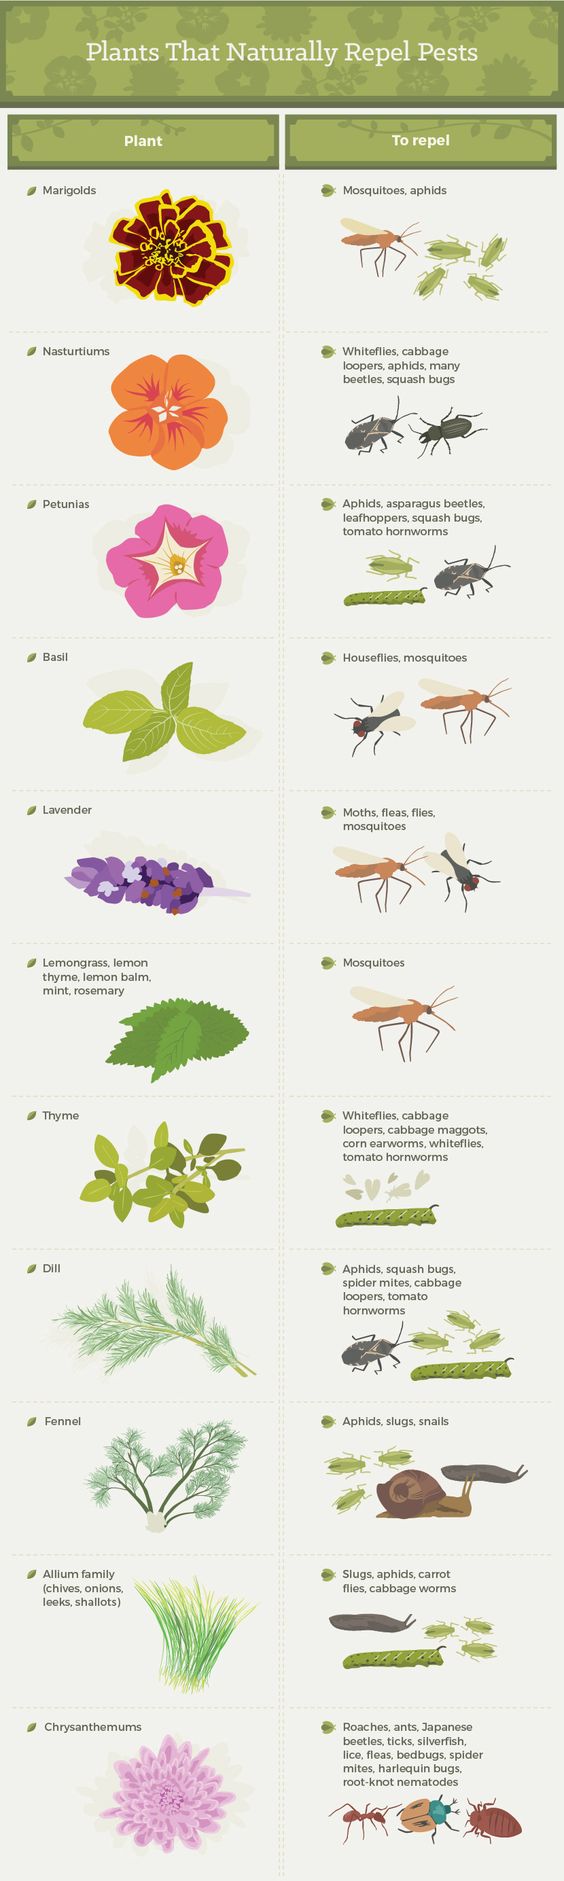 Companion planting for bug control. Found at fix.com awesome article!